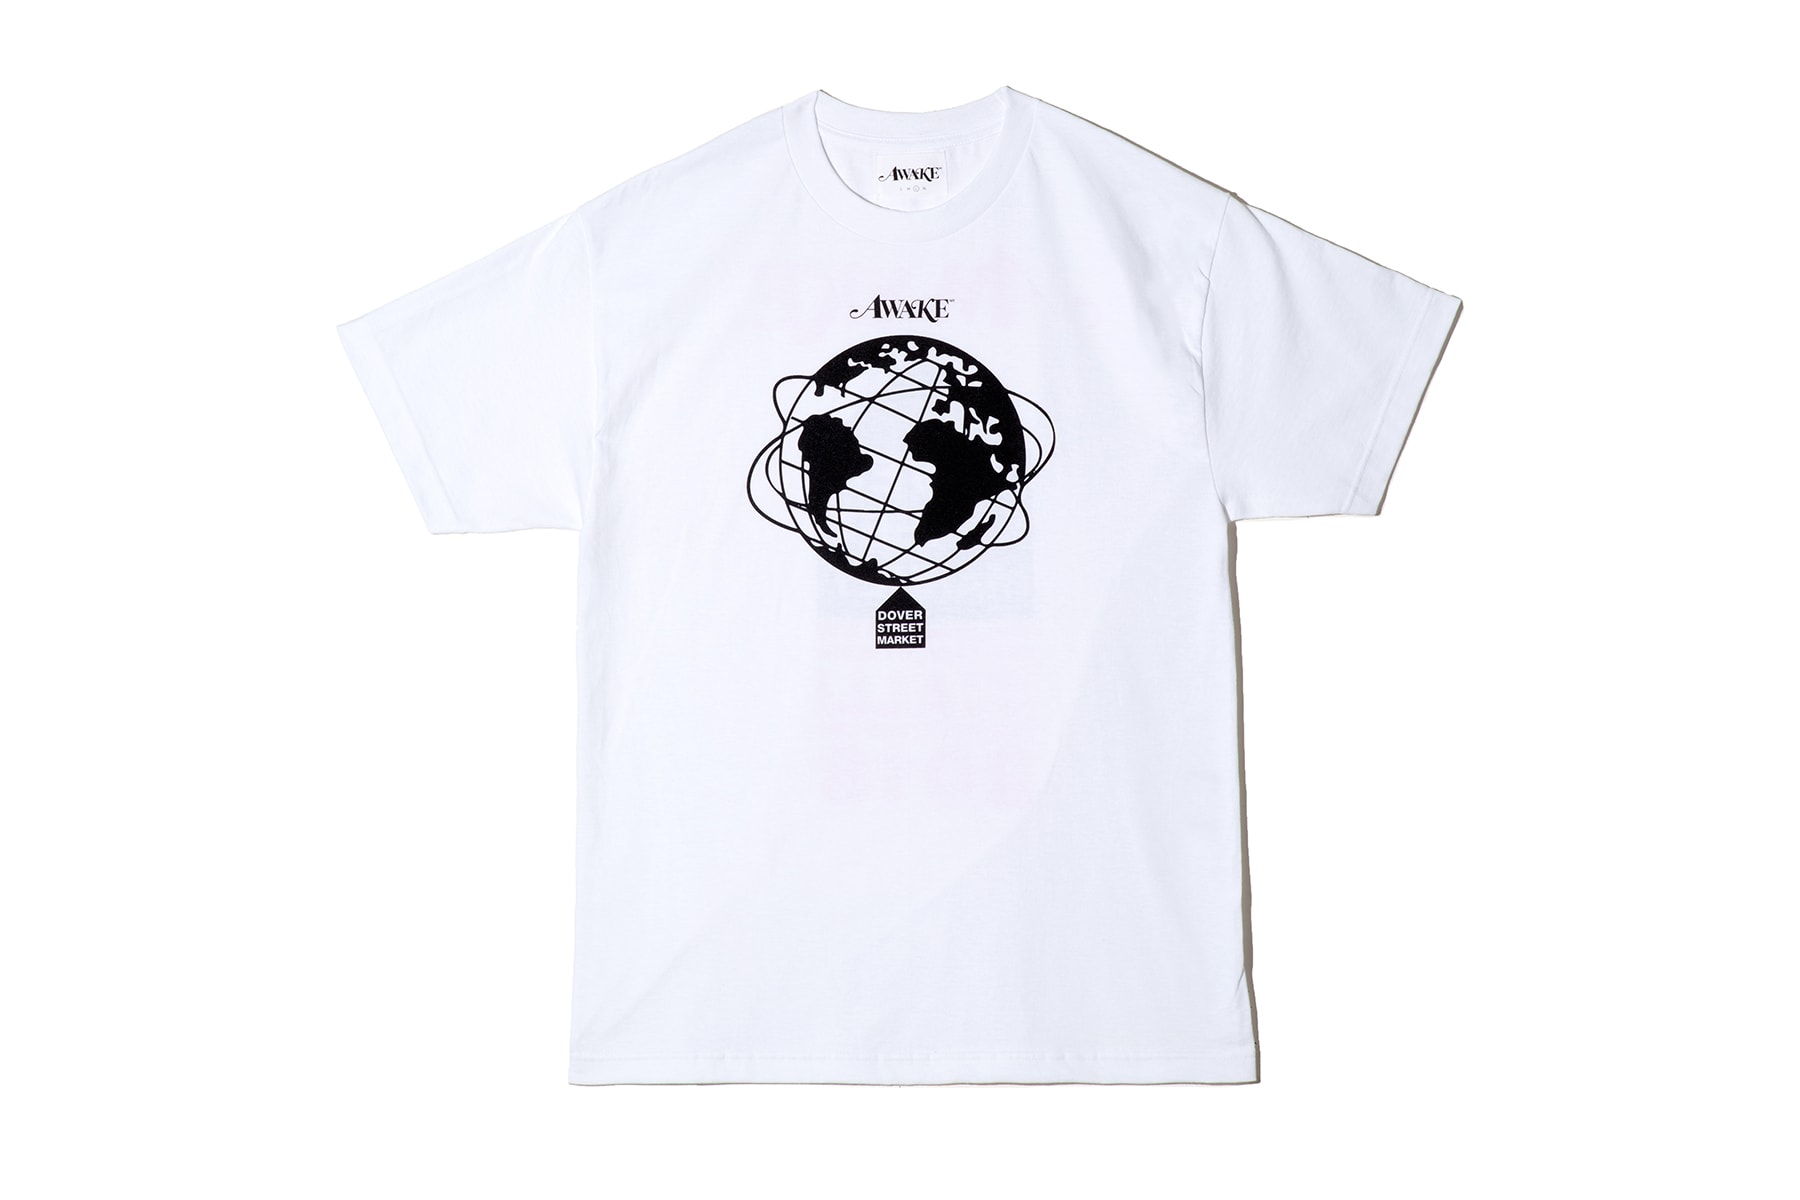 Awake NY Dover Street Market Spring Summer 2018 Drop SS18 tee shirt collaboration collection debut release installation may 3 limited edition co branding angelo baque